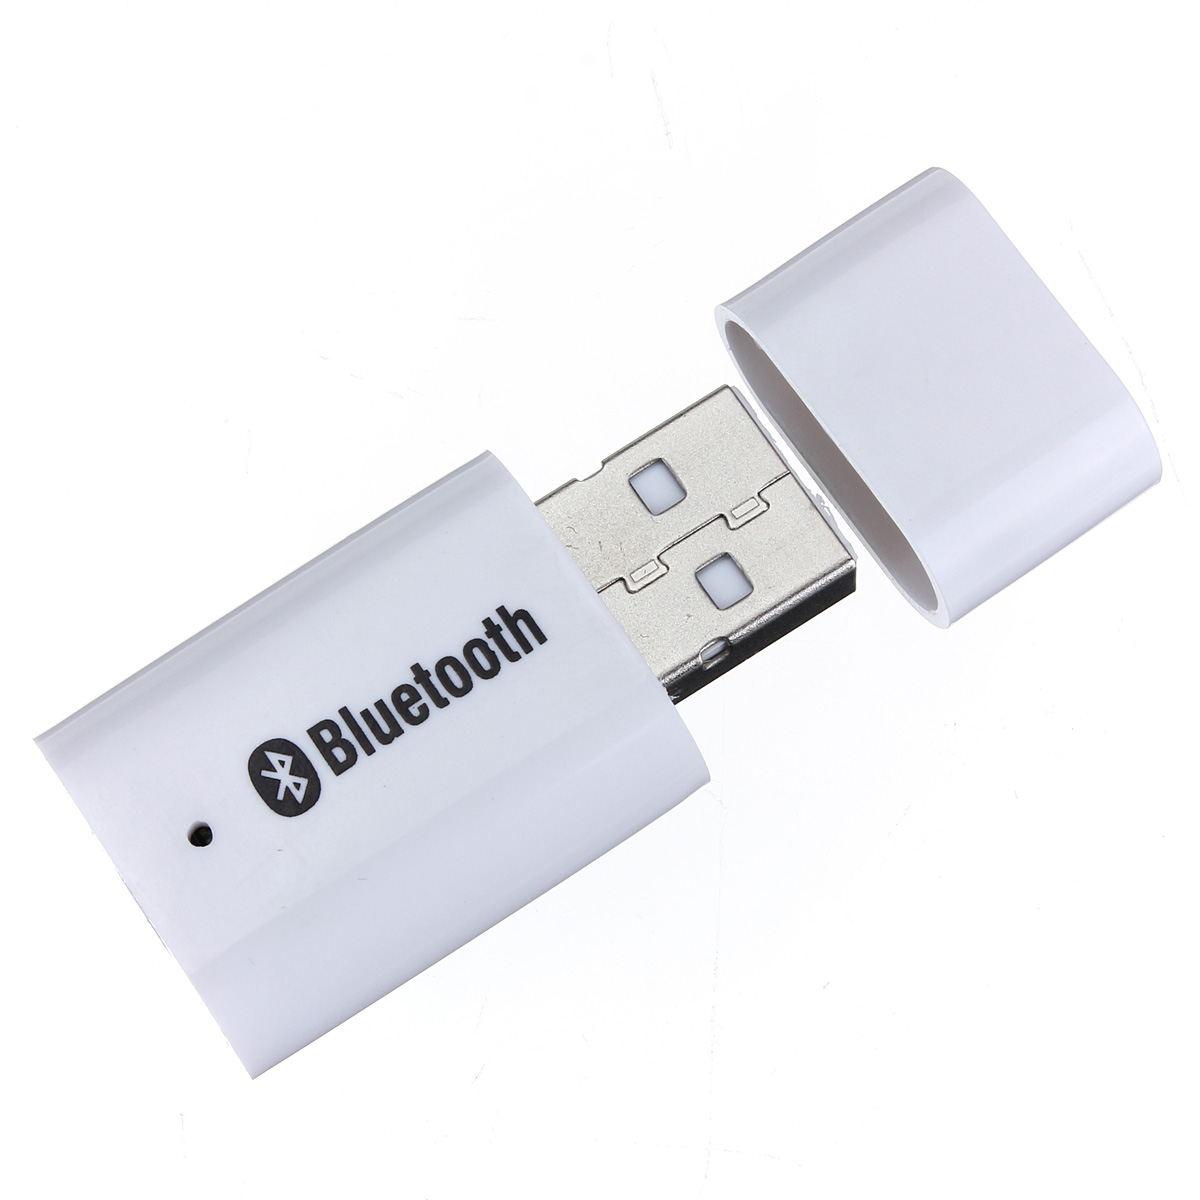 Find ELEGIANT F1350 USB bluetooth 5 0 Adapter Transmitter BT Receiver Audio Wireless USB Adapter for Computer PC Laptop for Sale on Gipsybee.com with cryptocurrencies